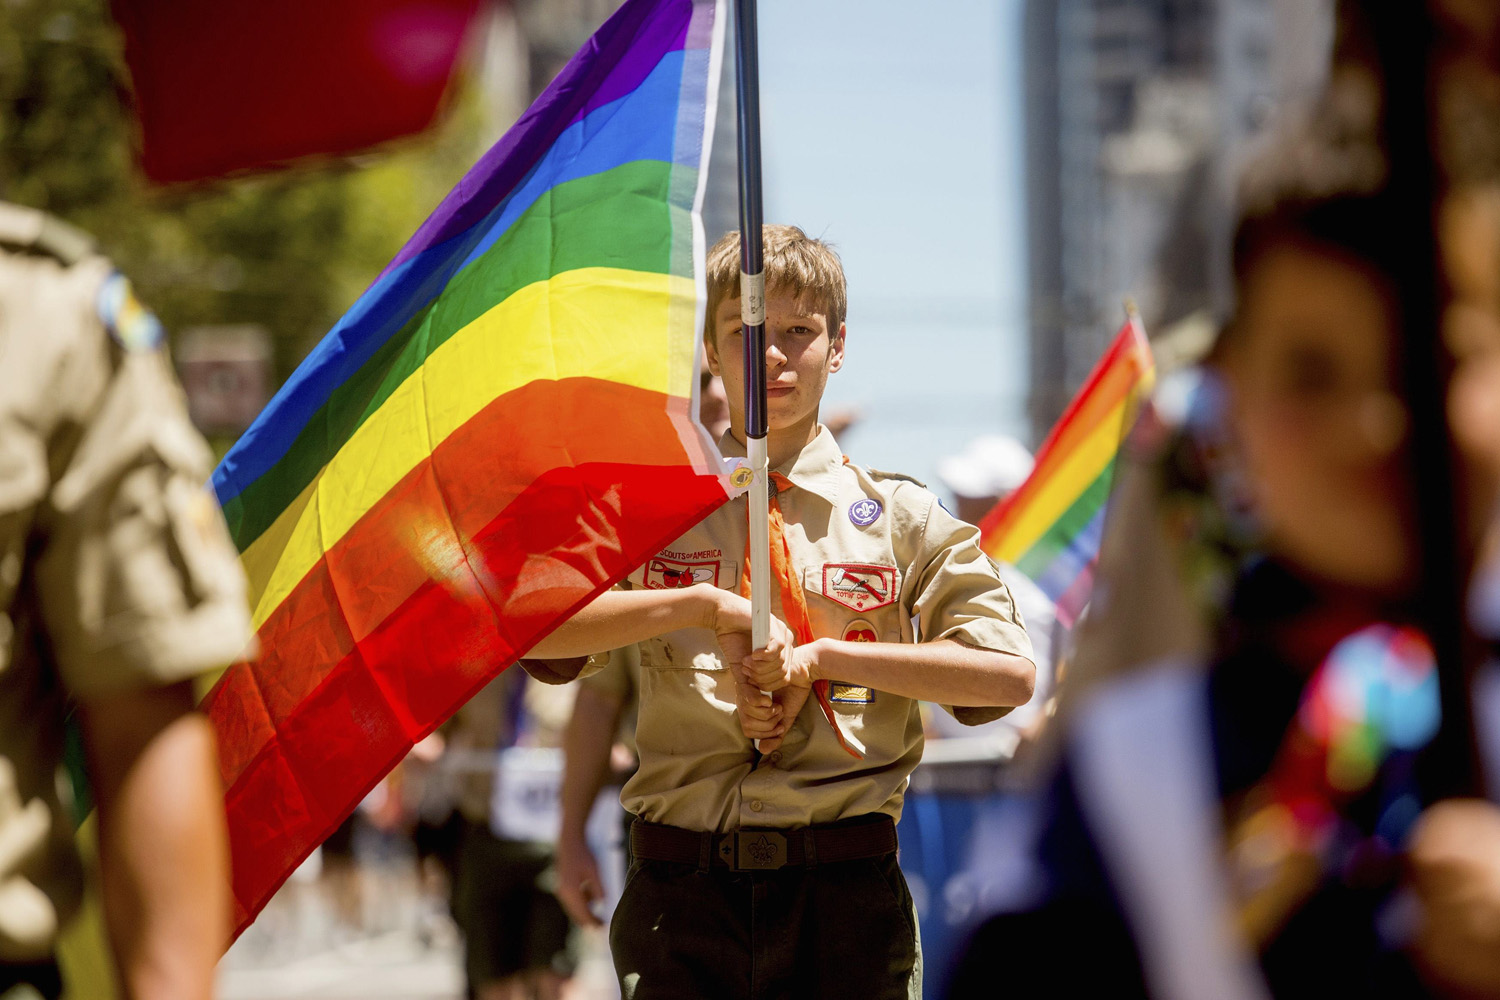 Boy Scout Casey Chambers carries a rainbow flag during the San Francisco Gay Pride Festival in California